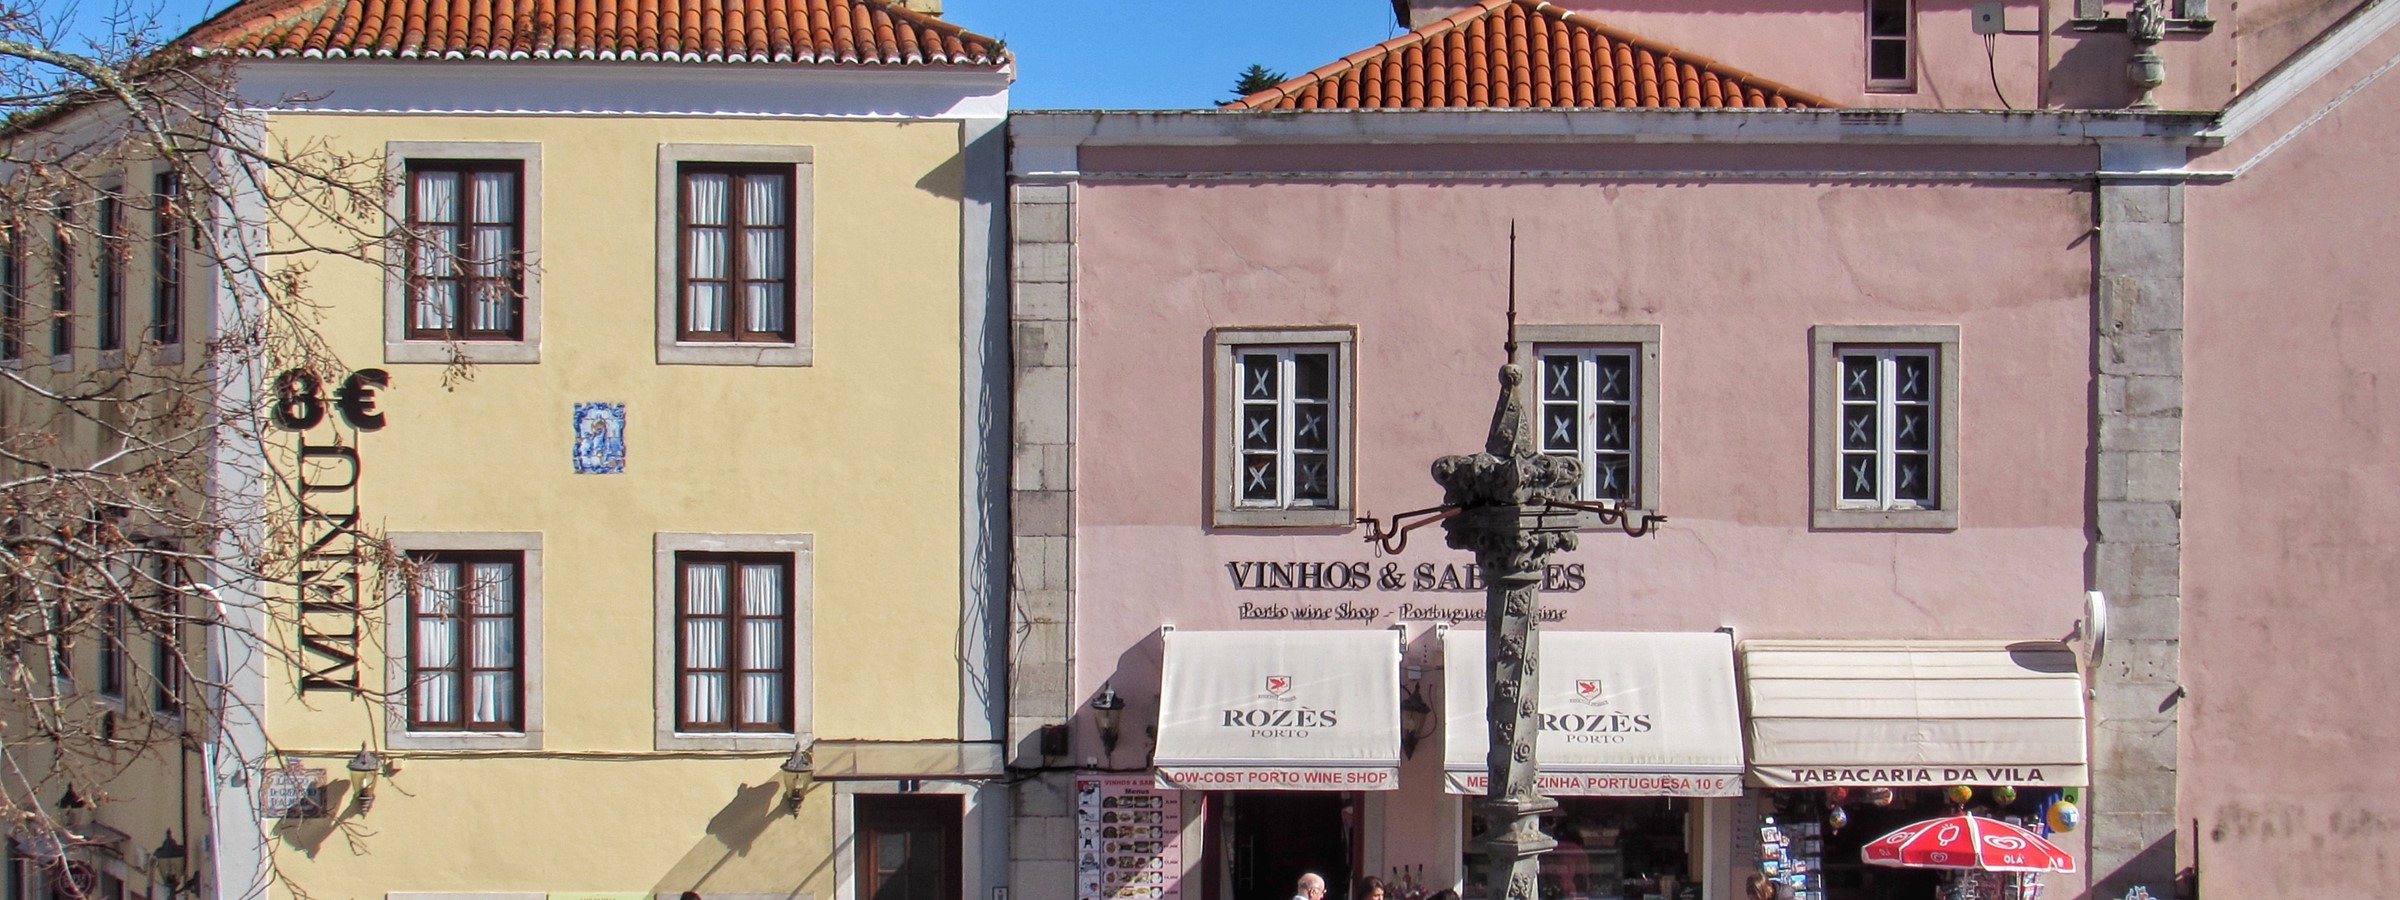 Where to eat in Sintra